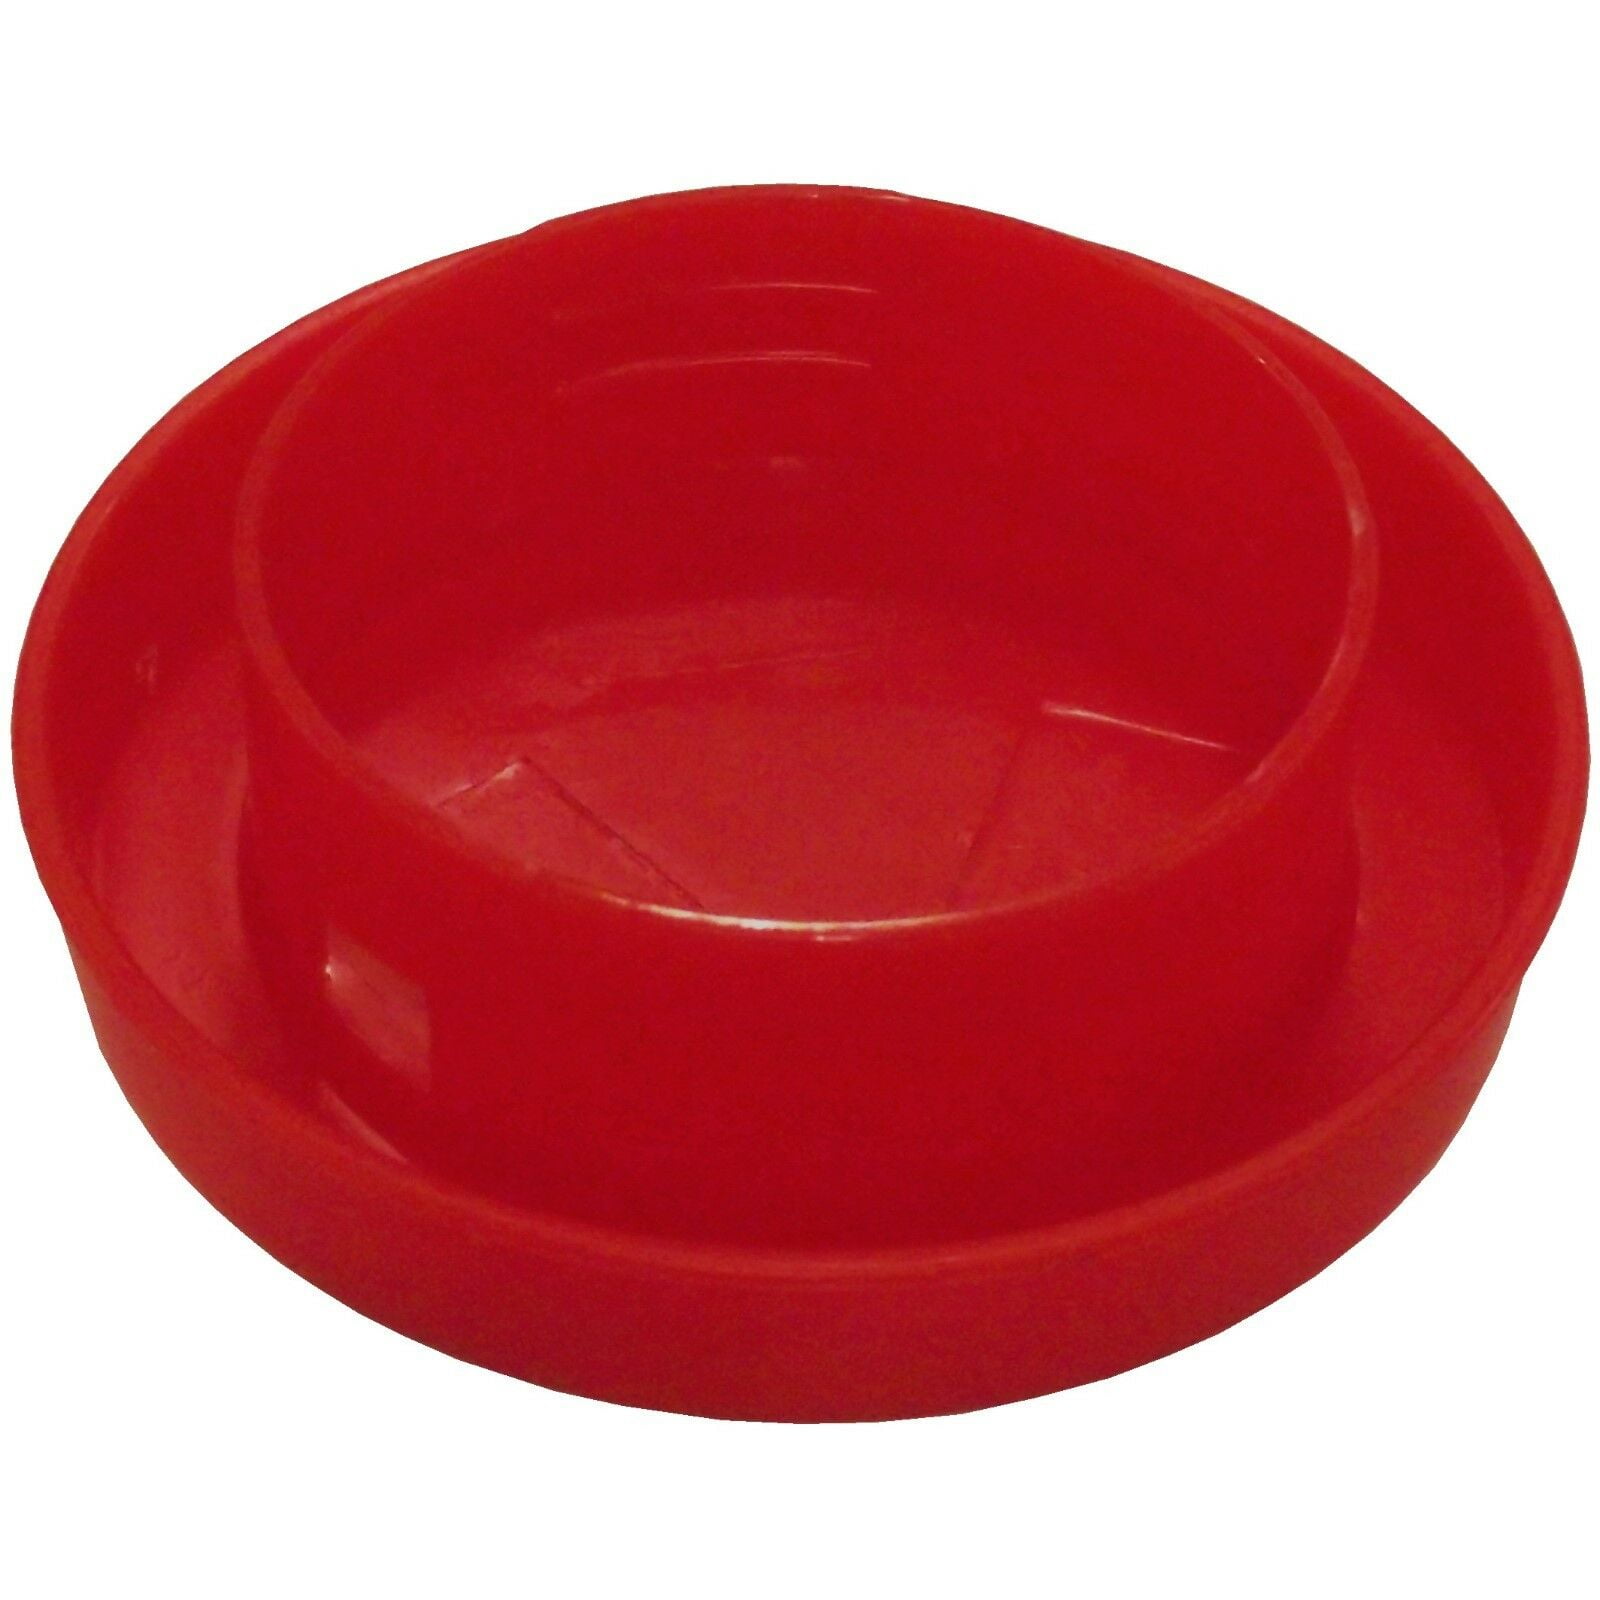 *COMBO* RED RITE FARM PRODUCTS QUART FEEDER & WATERER POULTRY CHICKEN CHICK 